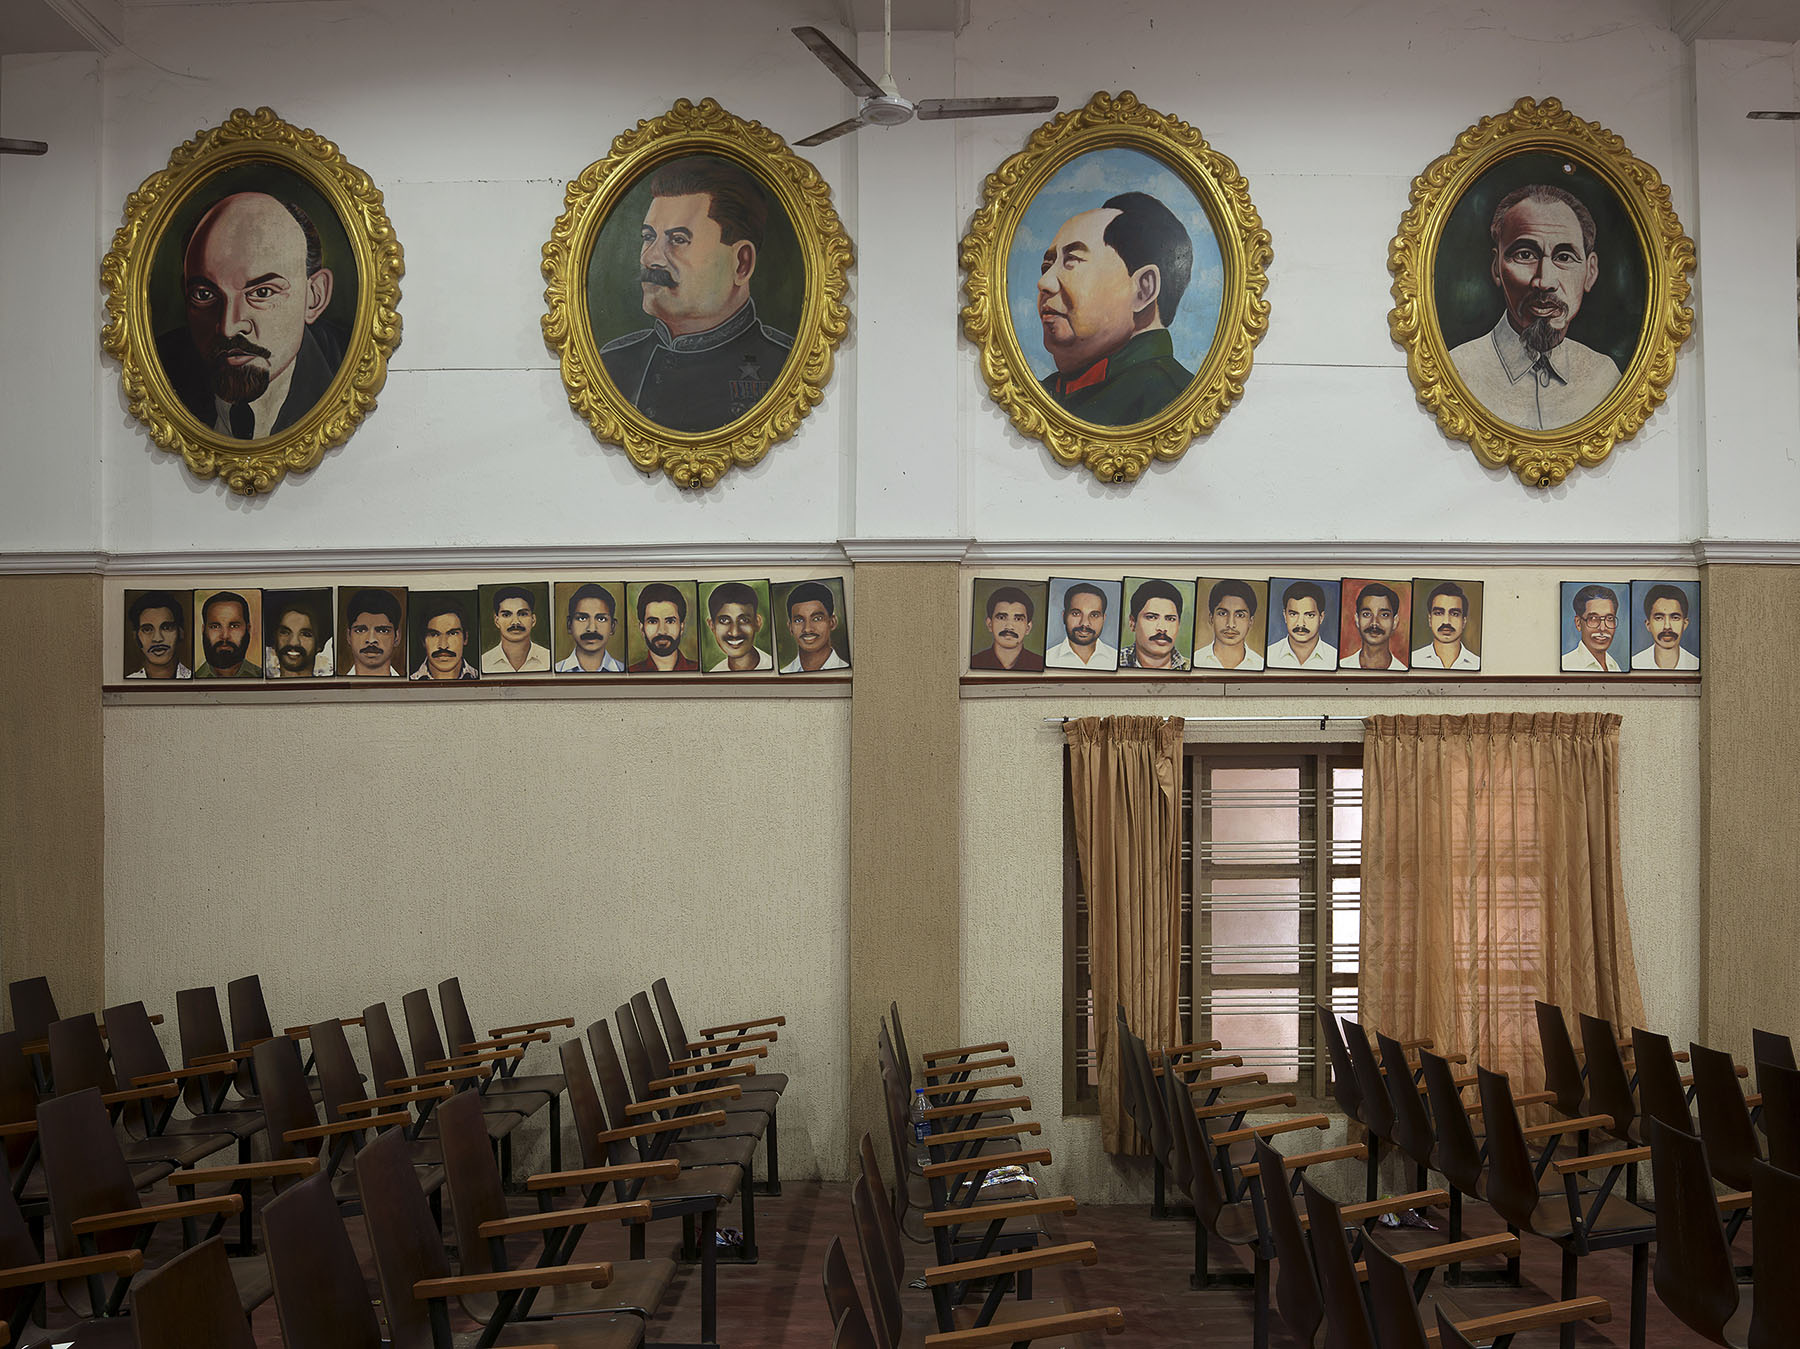 Communism in India - Kerala. Communist Party of India (Marxist), aka CPI (M): Kannur district committee office.
Meeting hall with portraits of local party activists beneath portraits of Lenin, Stalin, Mao and Ho Chi Minh.
Since the 2016 elections, CPI (M) has been the major political party in Kerala and the leading partner in the communist-led government of Kerala State.